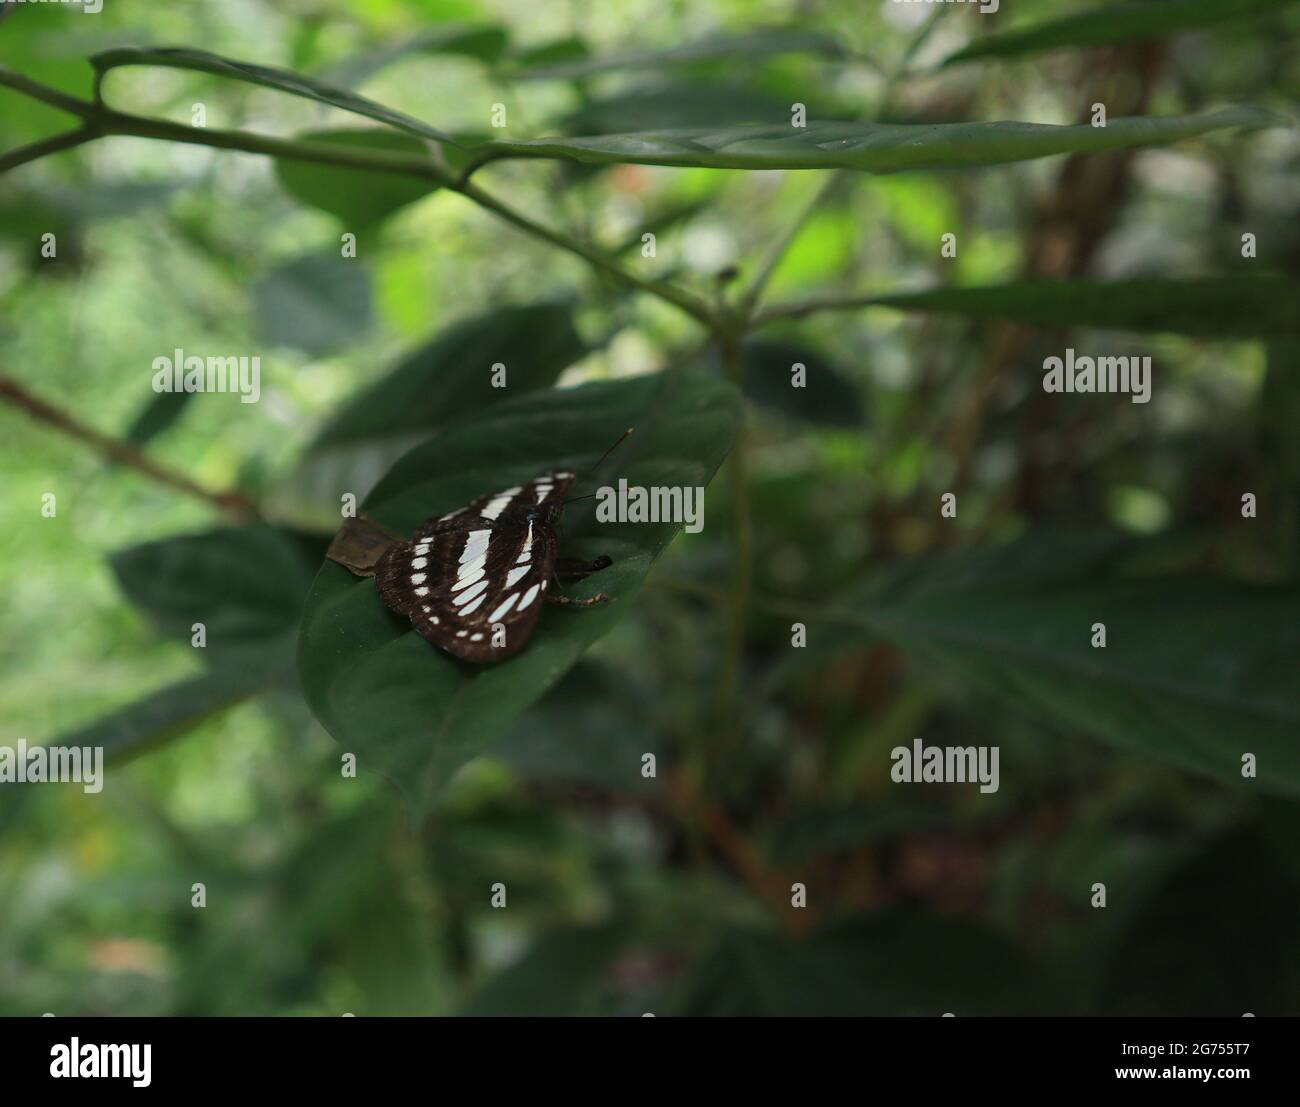 A common sailer butterfly sitting on a leaf while spreading it's wings parallel to the leaf Stock Photo